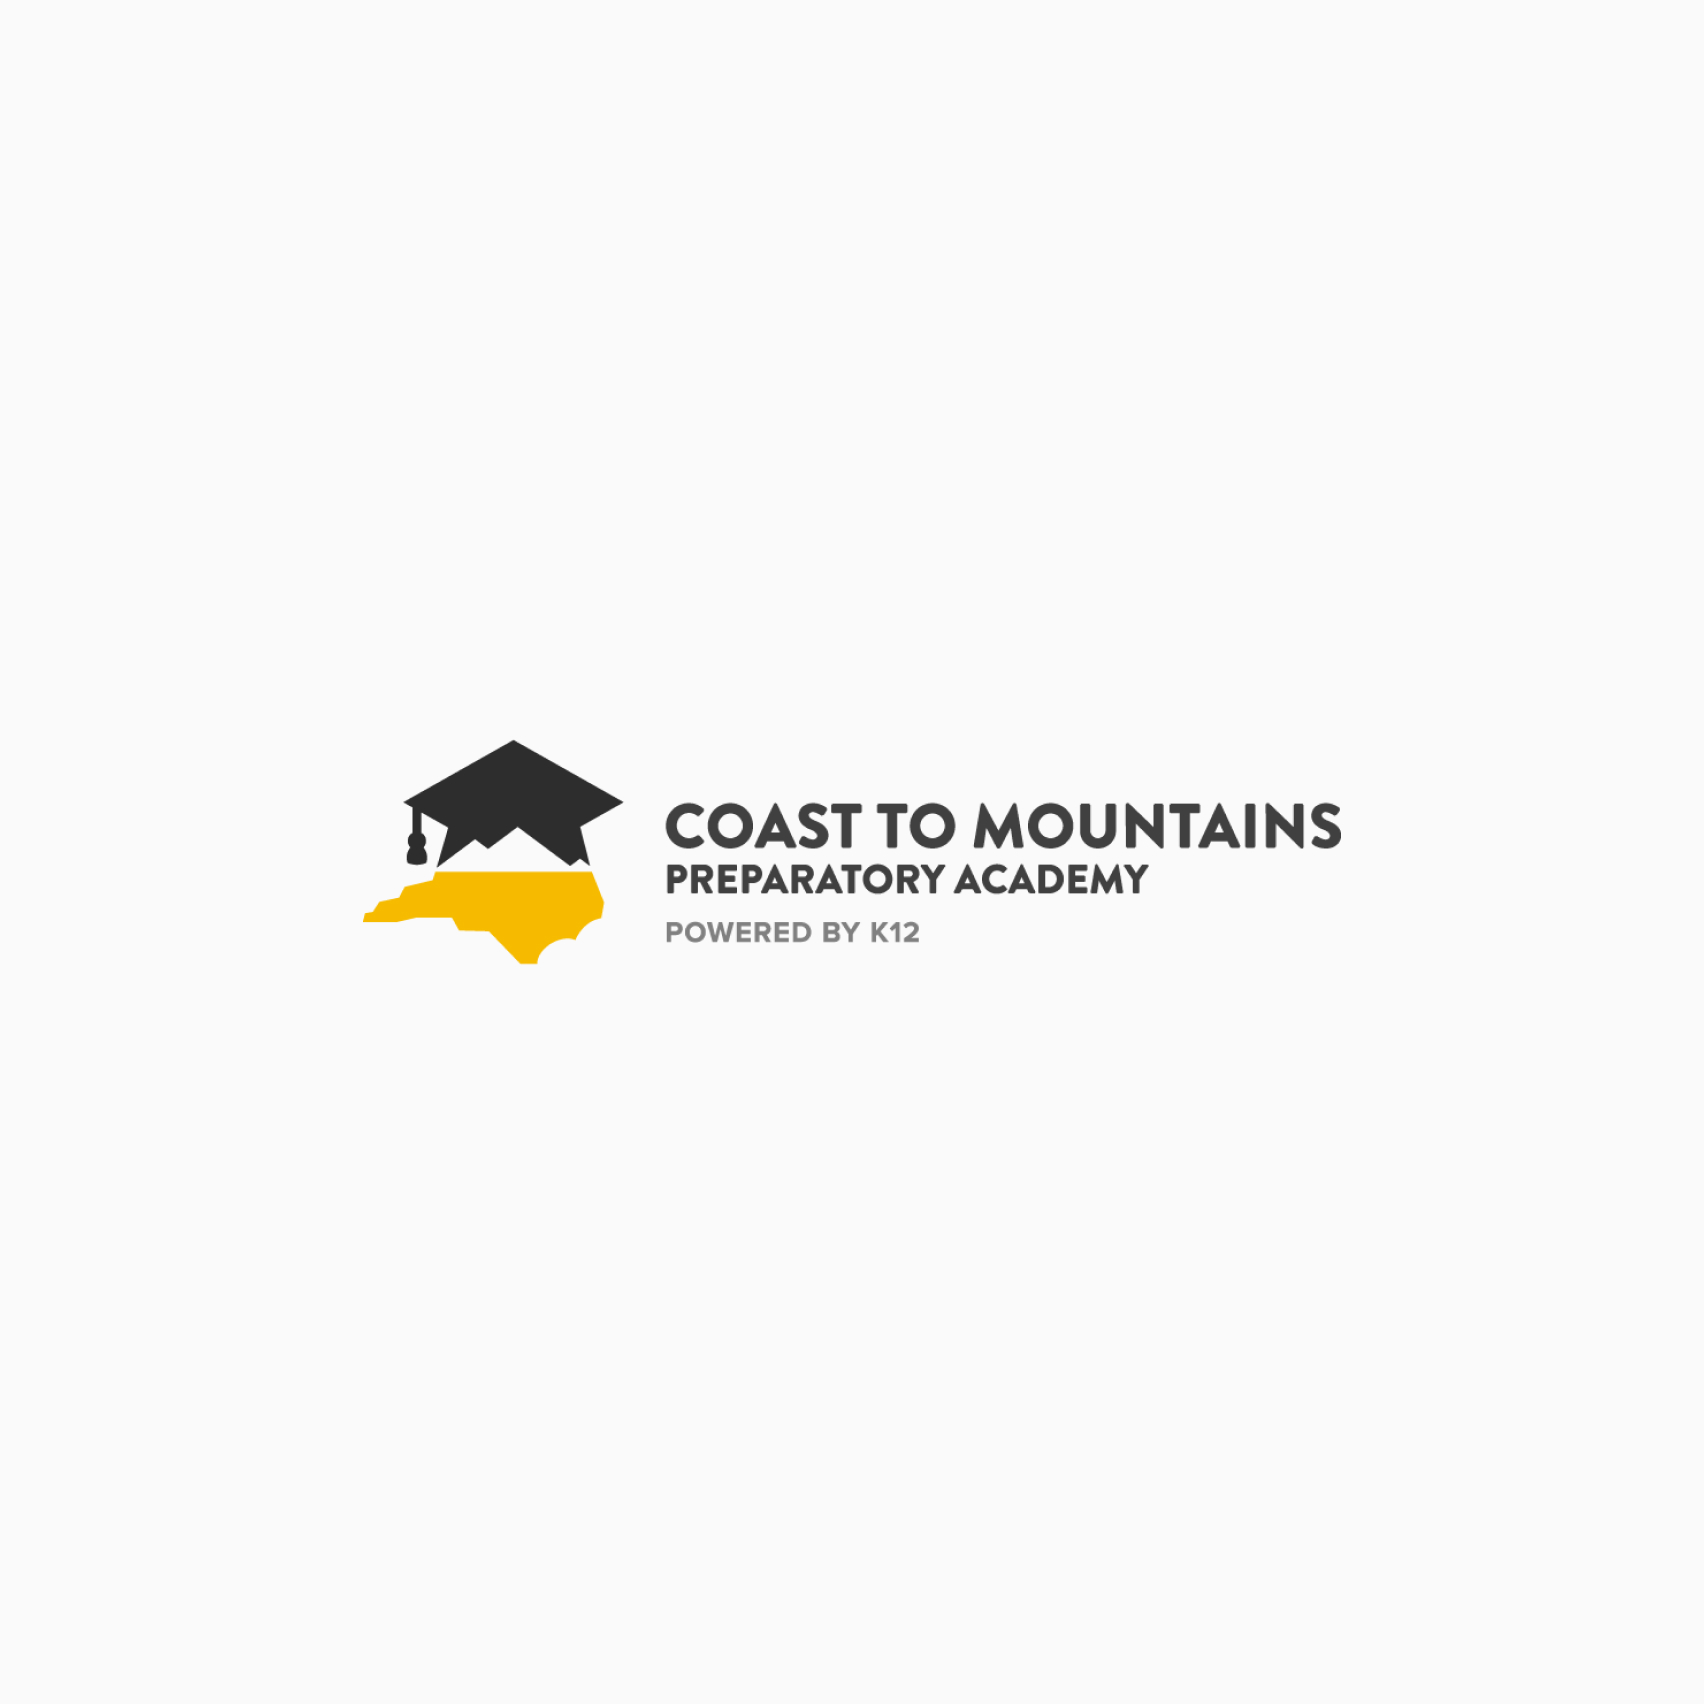 Tuition and Costs image 17 (name Coast to Mountains)